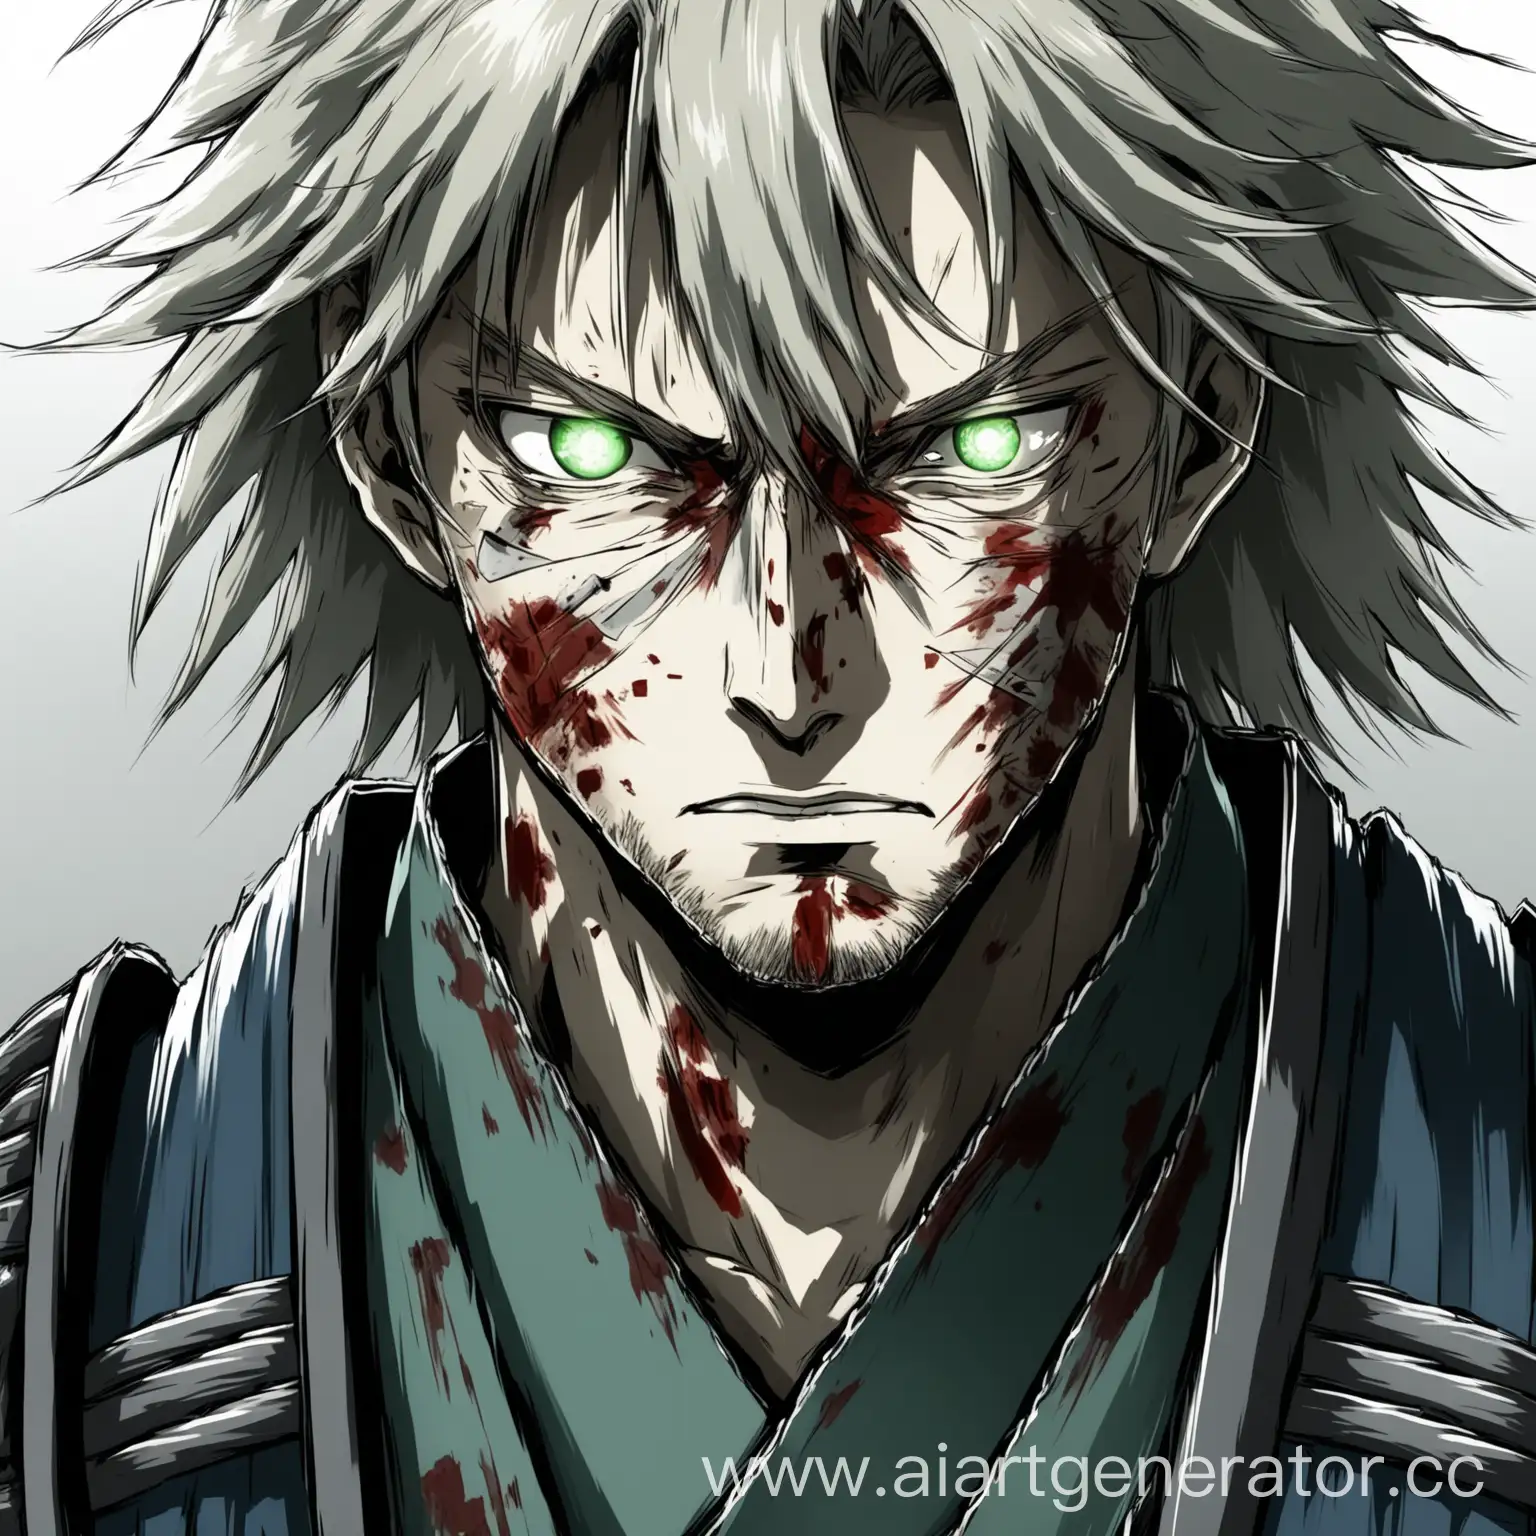 Wounded-FairHaired-Samurai-with-Intense-GreenGrey-Eyes-in-Anime-Style